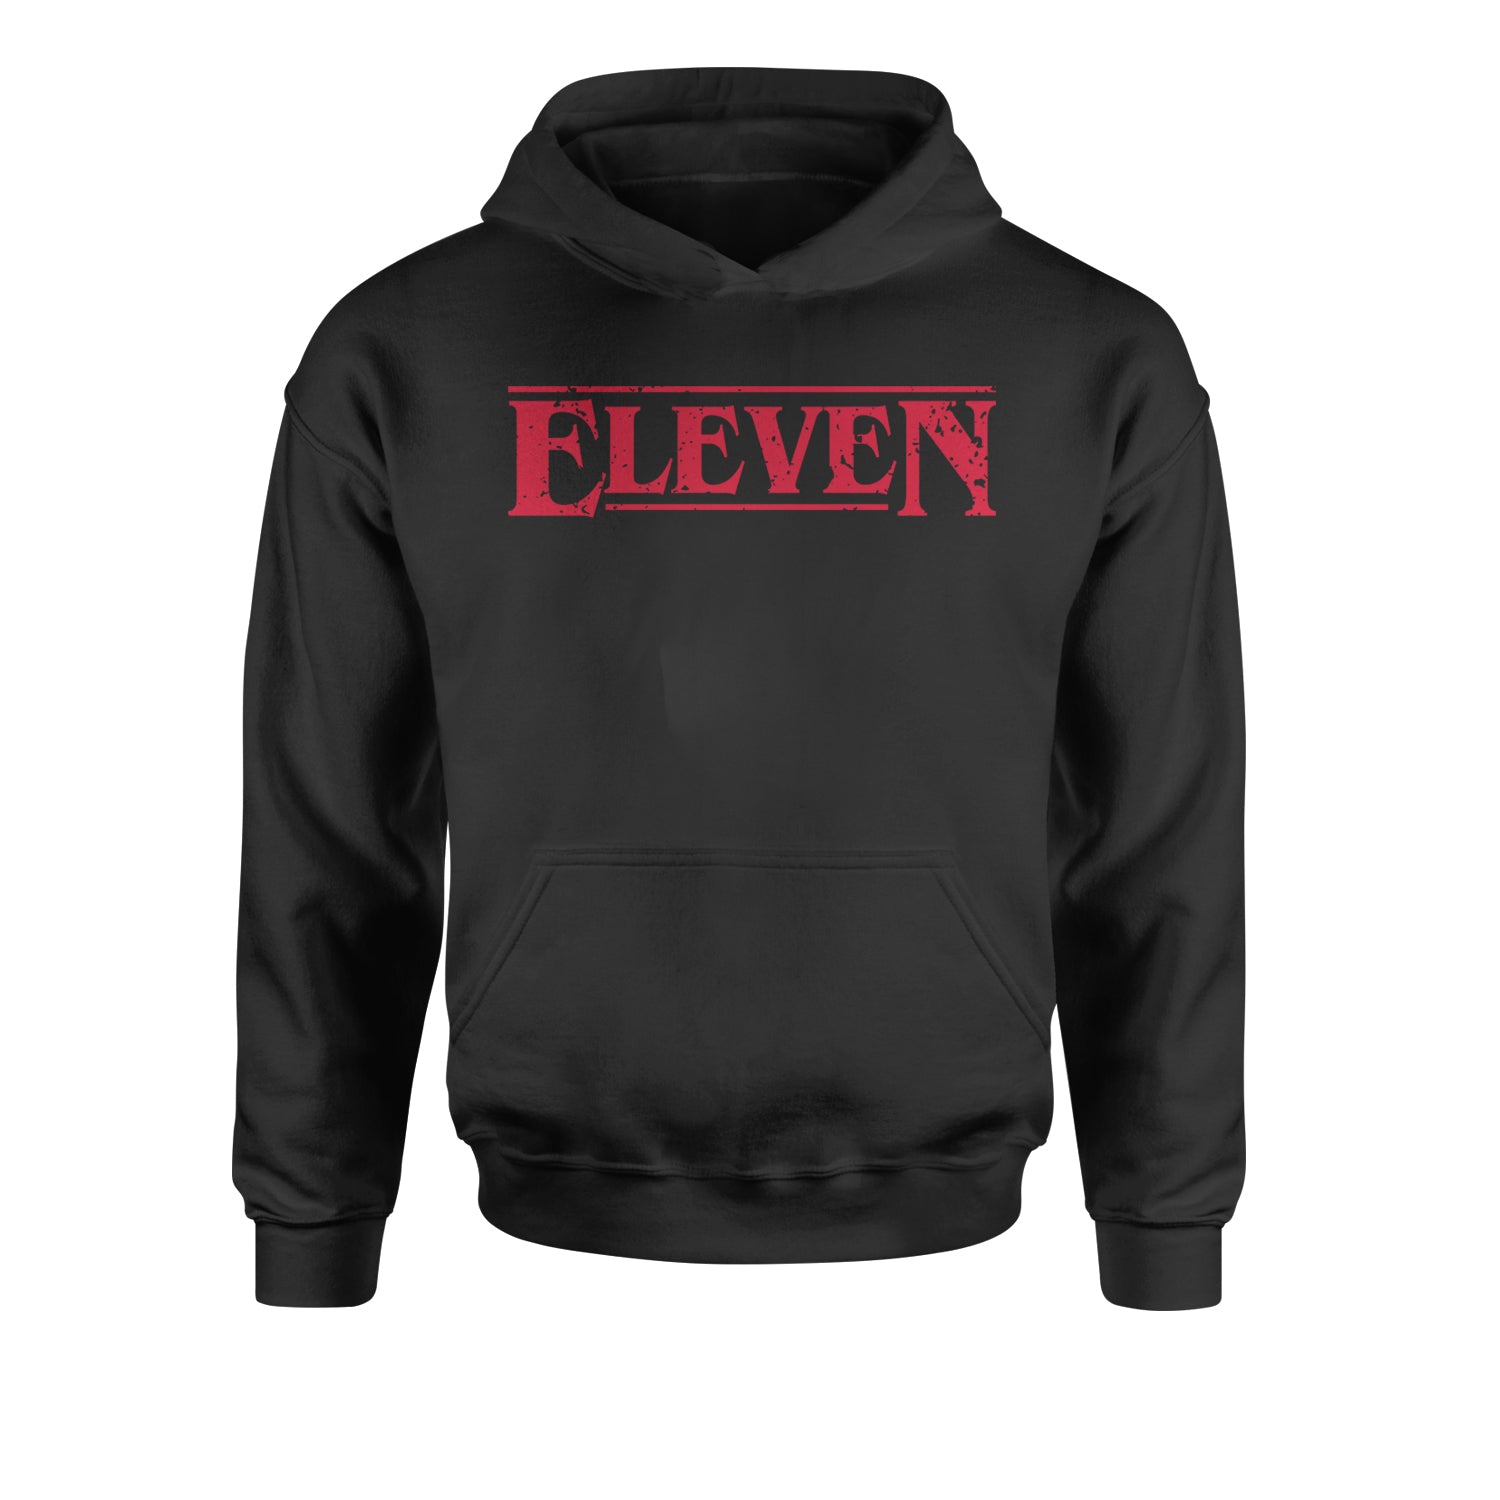 Eleven Youth-Sized Hoodie